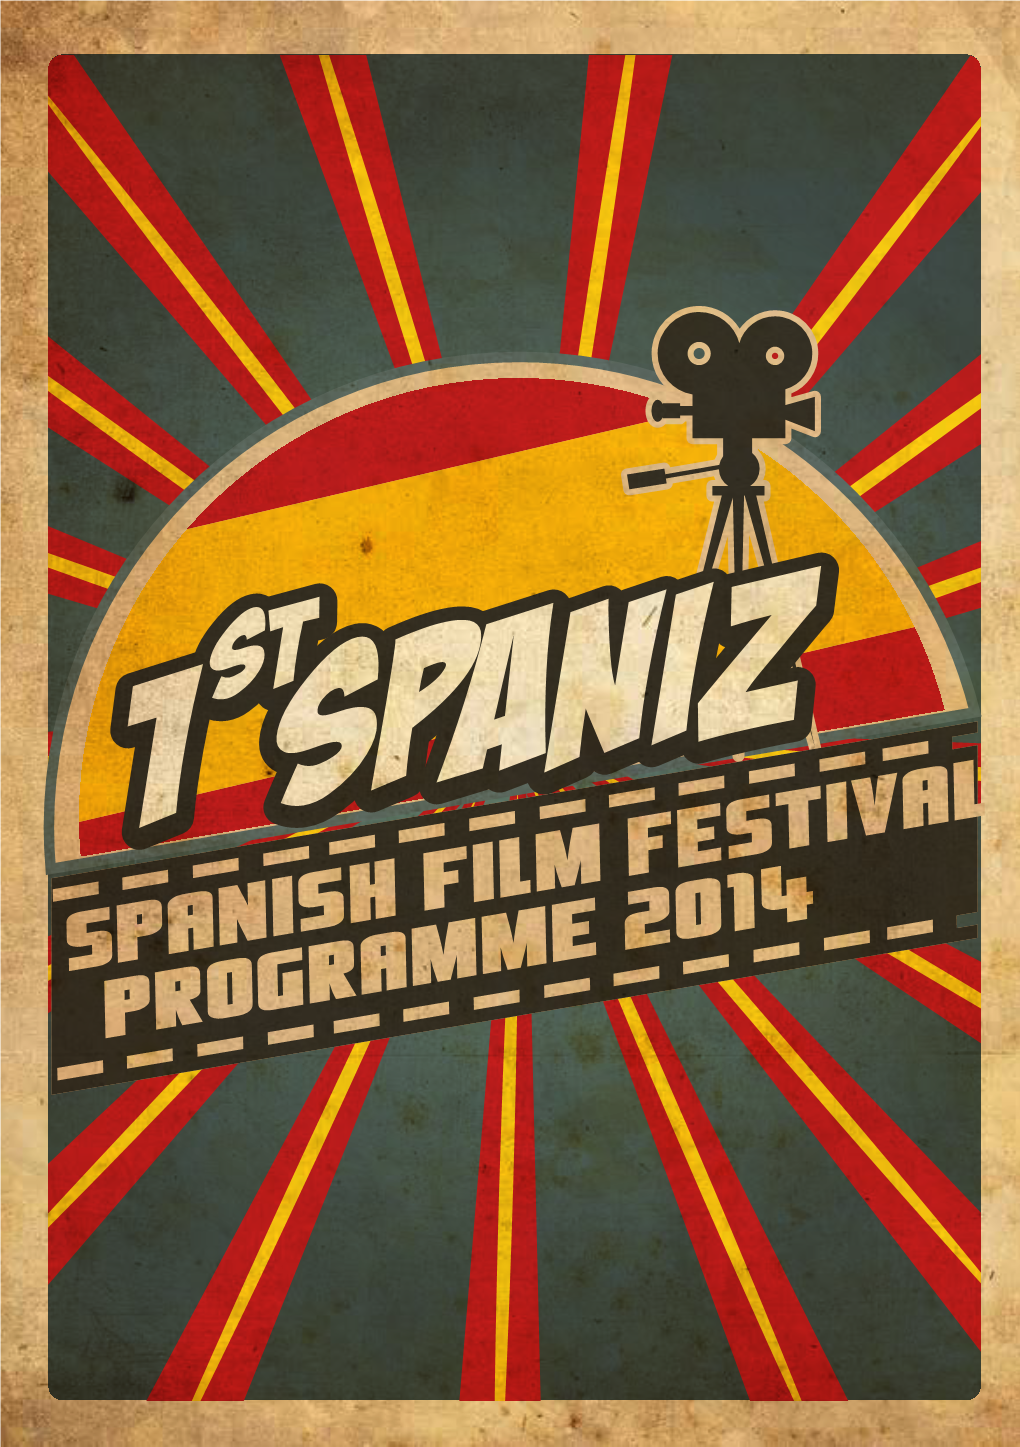 SPANISH FILM FESTIVAL PROGRAMME 2014 WEDNESDAY MAY 14TH 2014 18:00- Welcoming Drink (Sangria) 18:30- Welcome by the Chargée D’Affaires of the Embassy of Spain, Ms